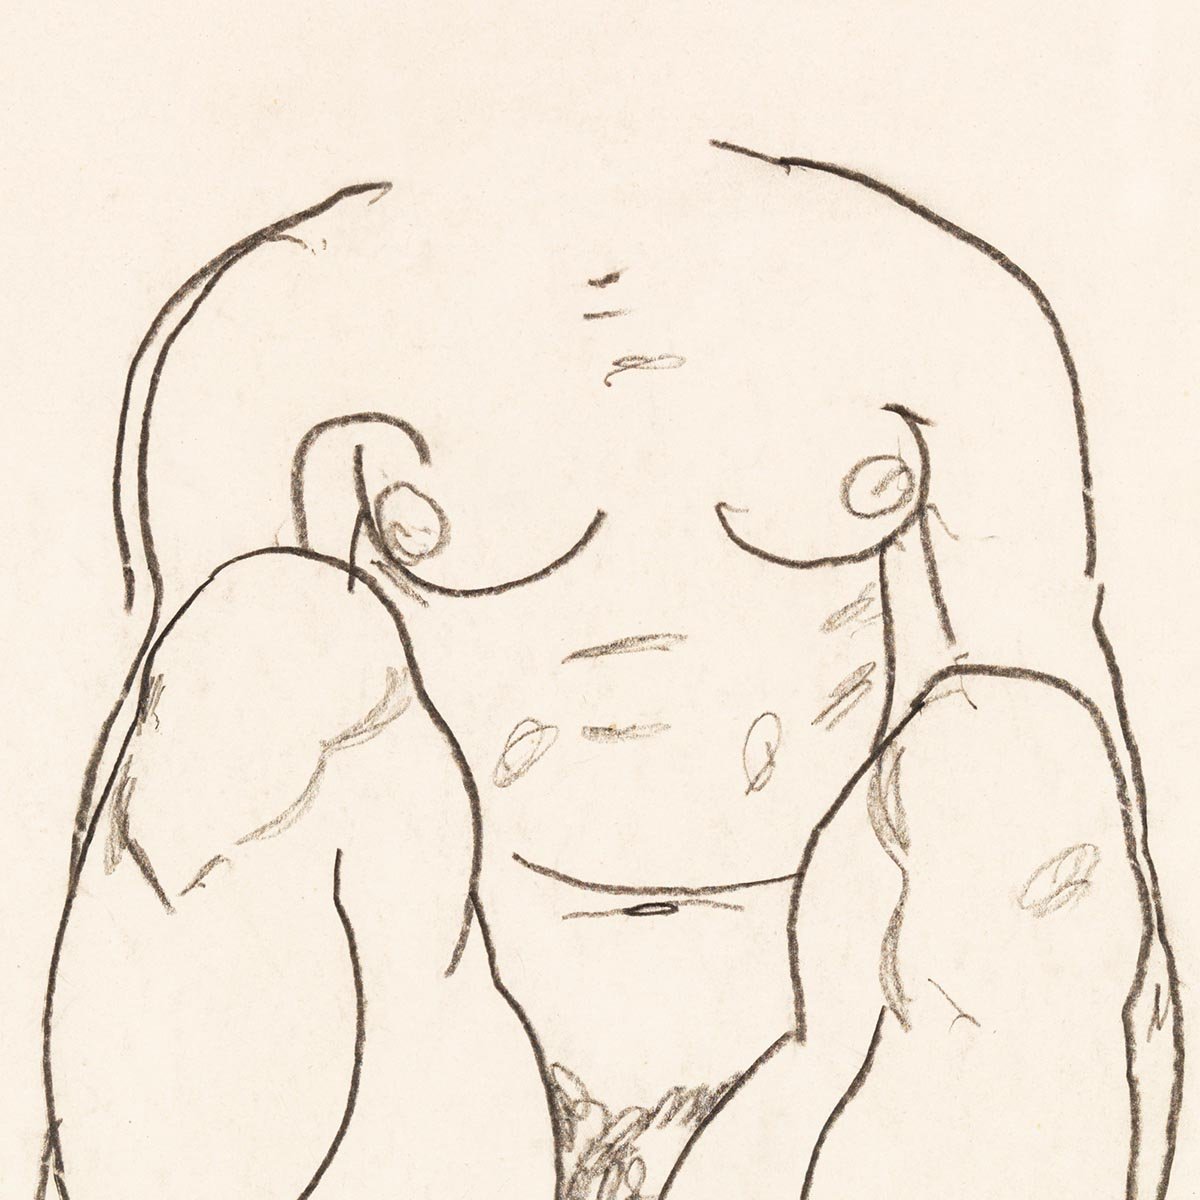 Torso of a Seated Woman with Boots by Egon Schiele